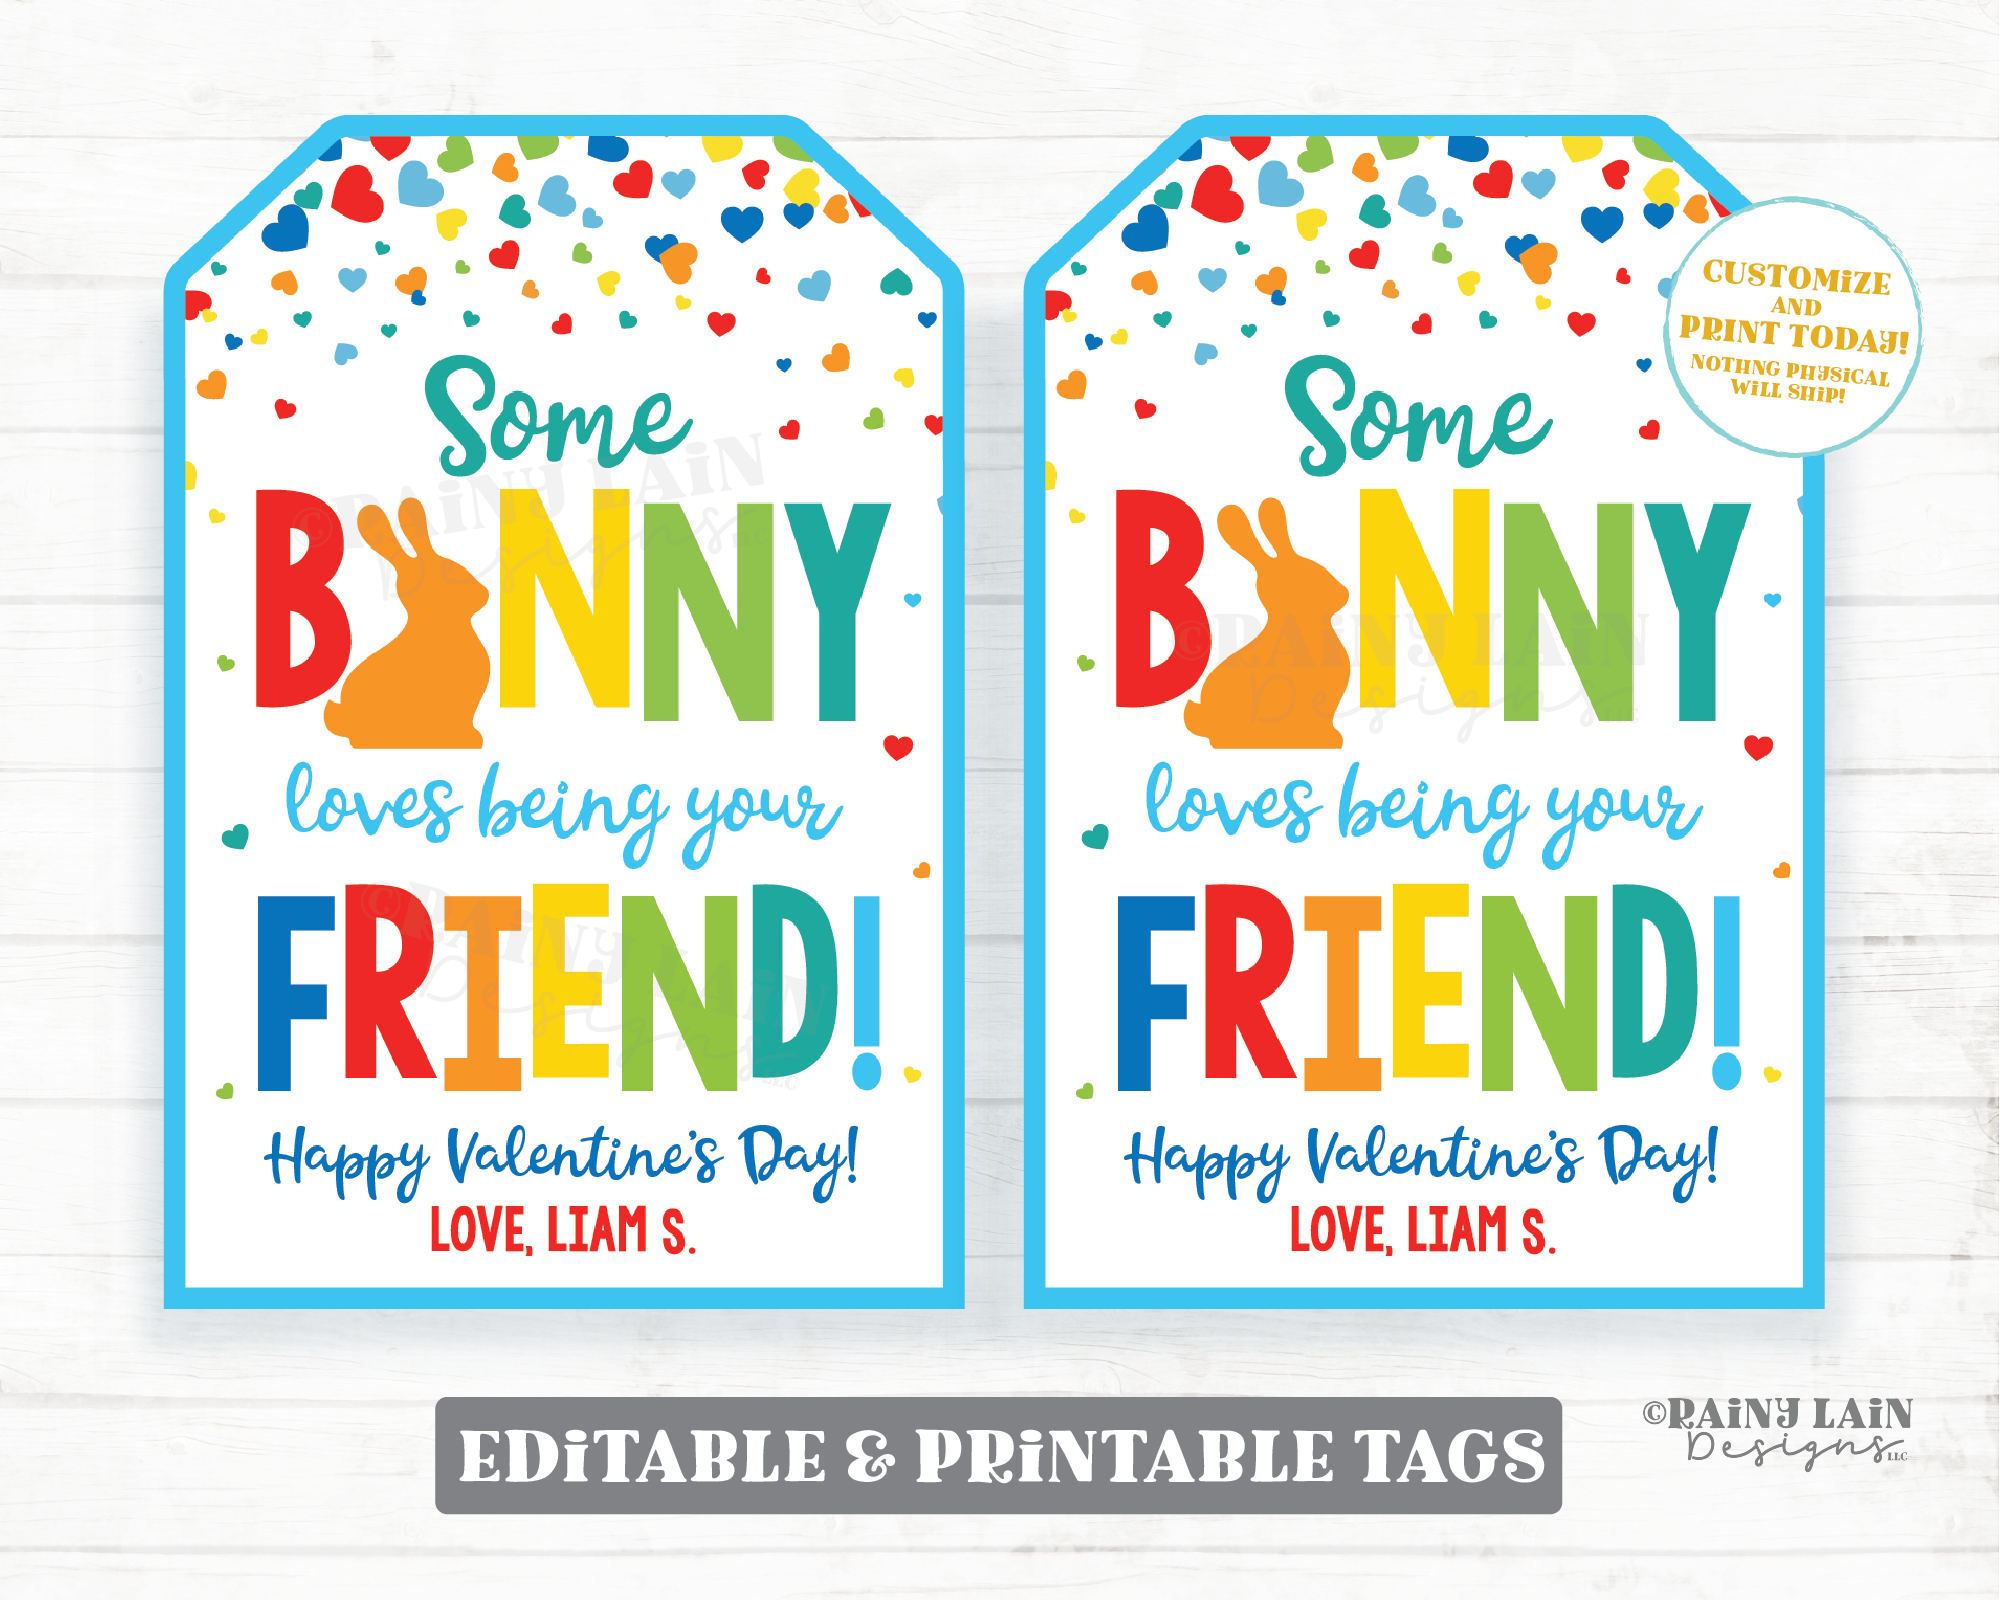 Some Bunny Loves Being Your Friend Valentine Tag Cheese Crackers Bunny Graham Snack Cheddar Bunnies Preschool Classroom Non-Candy Printable